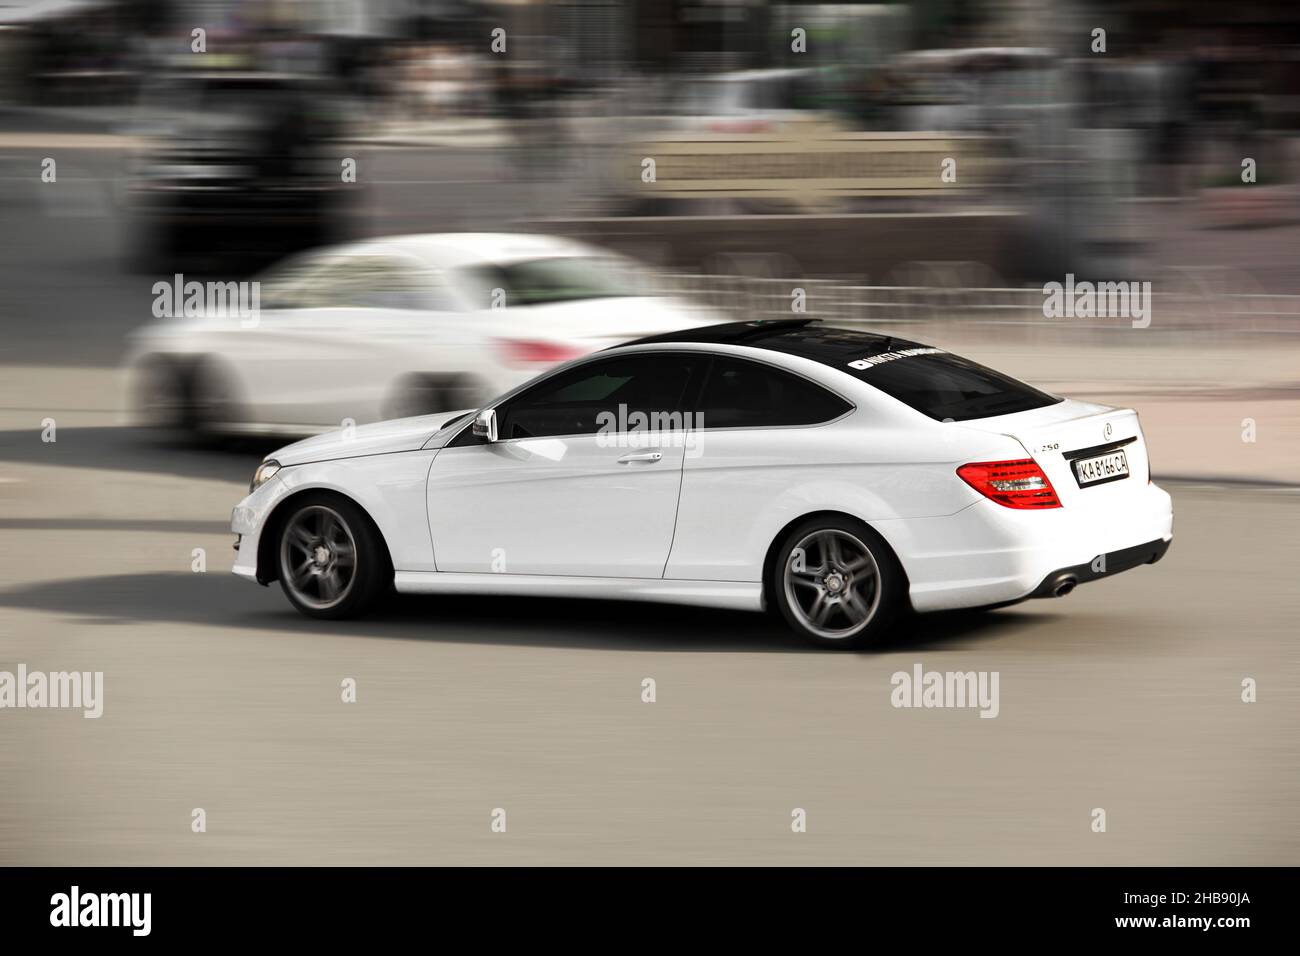 Kiev, Ukraine - May 22, 2021: White Mercedes-Benz C250 Coupe in motion Stock Photo